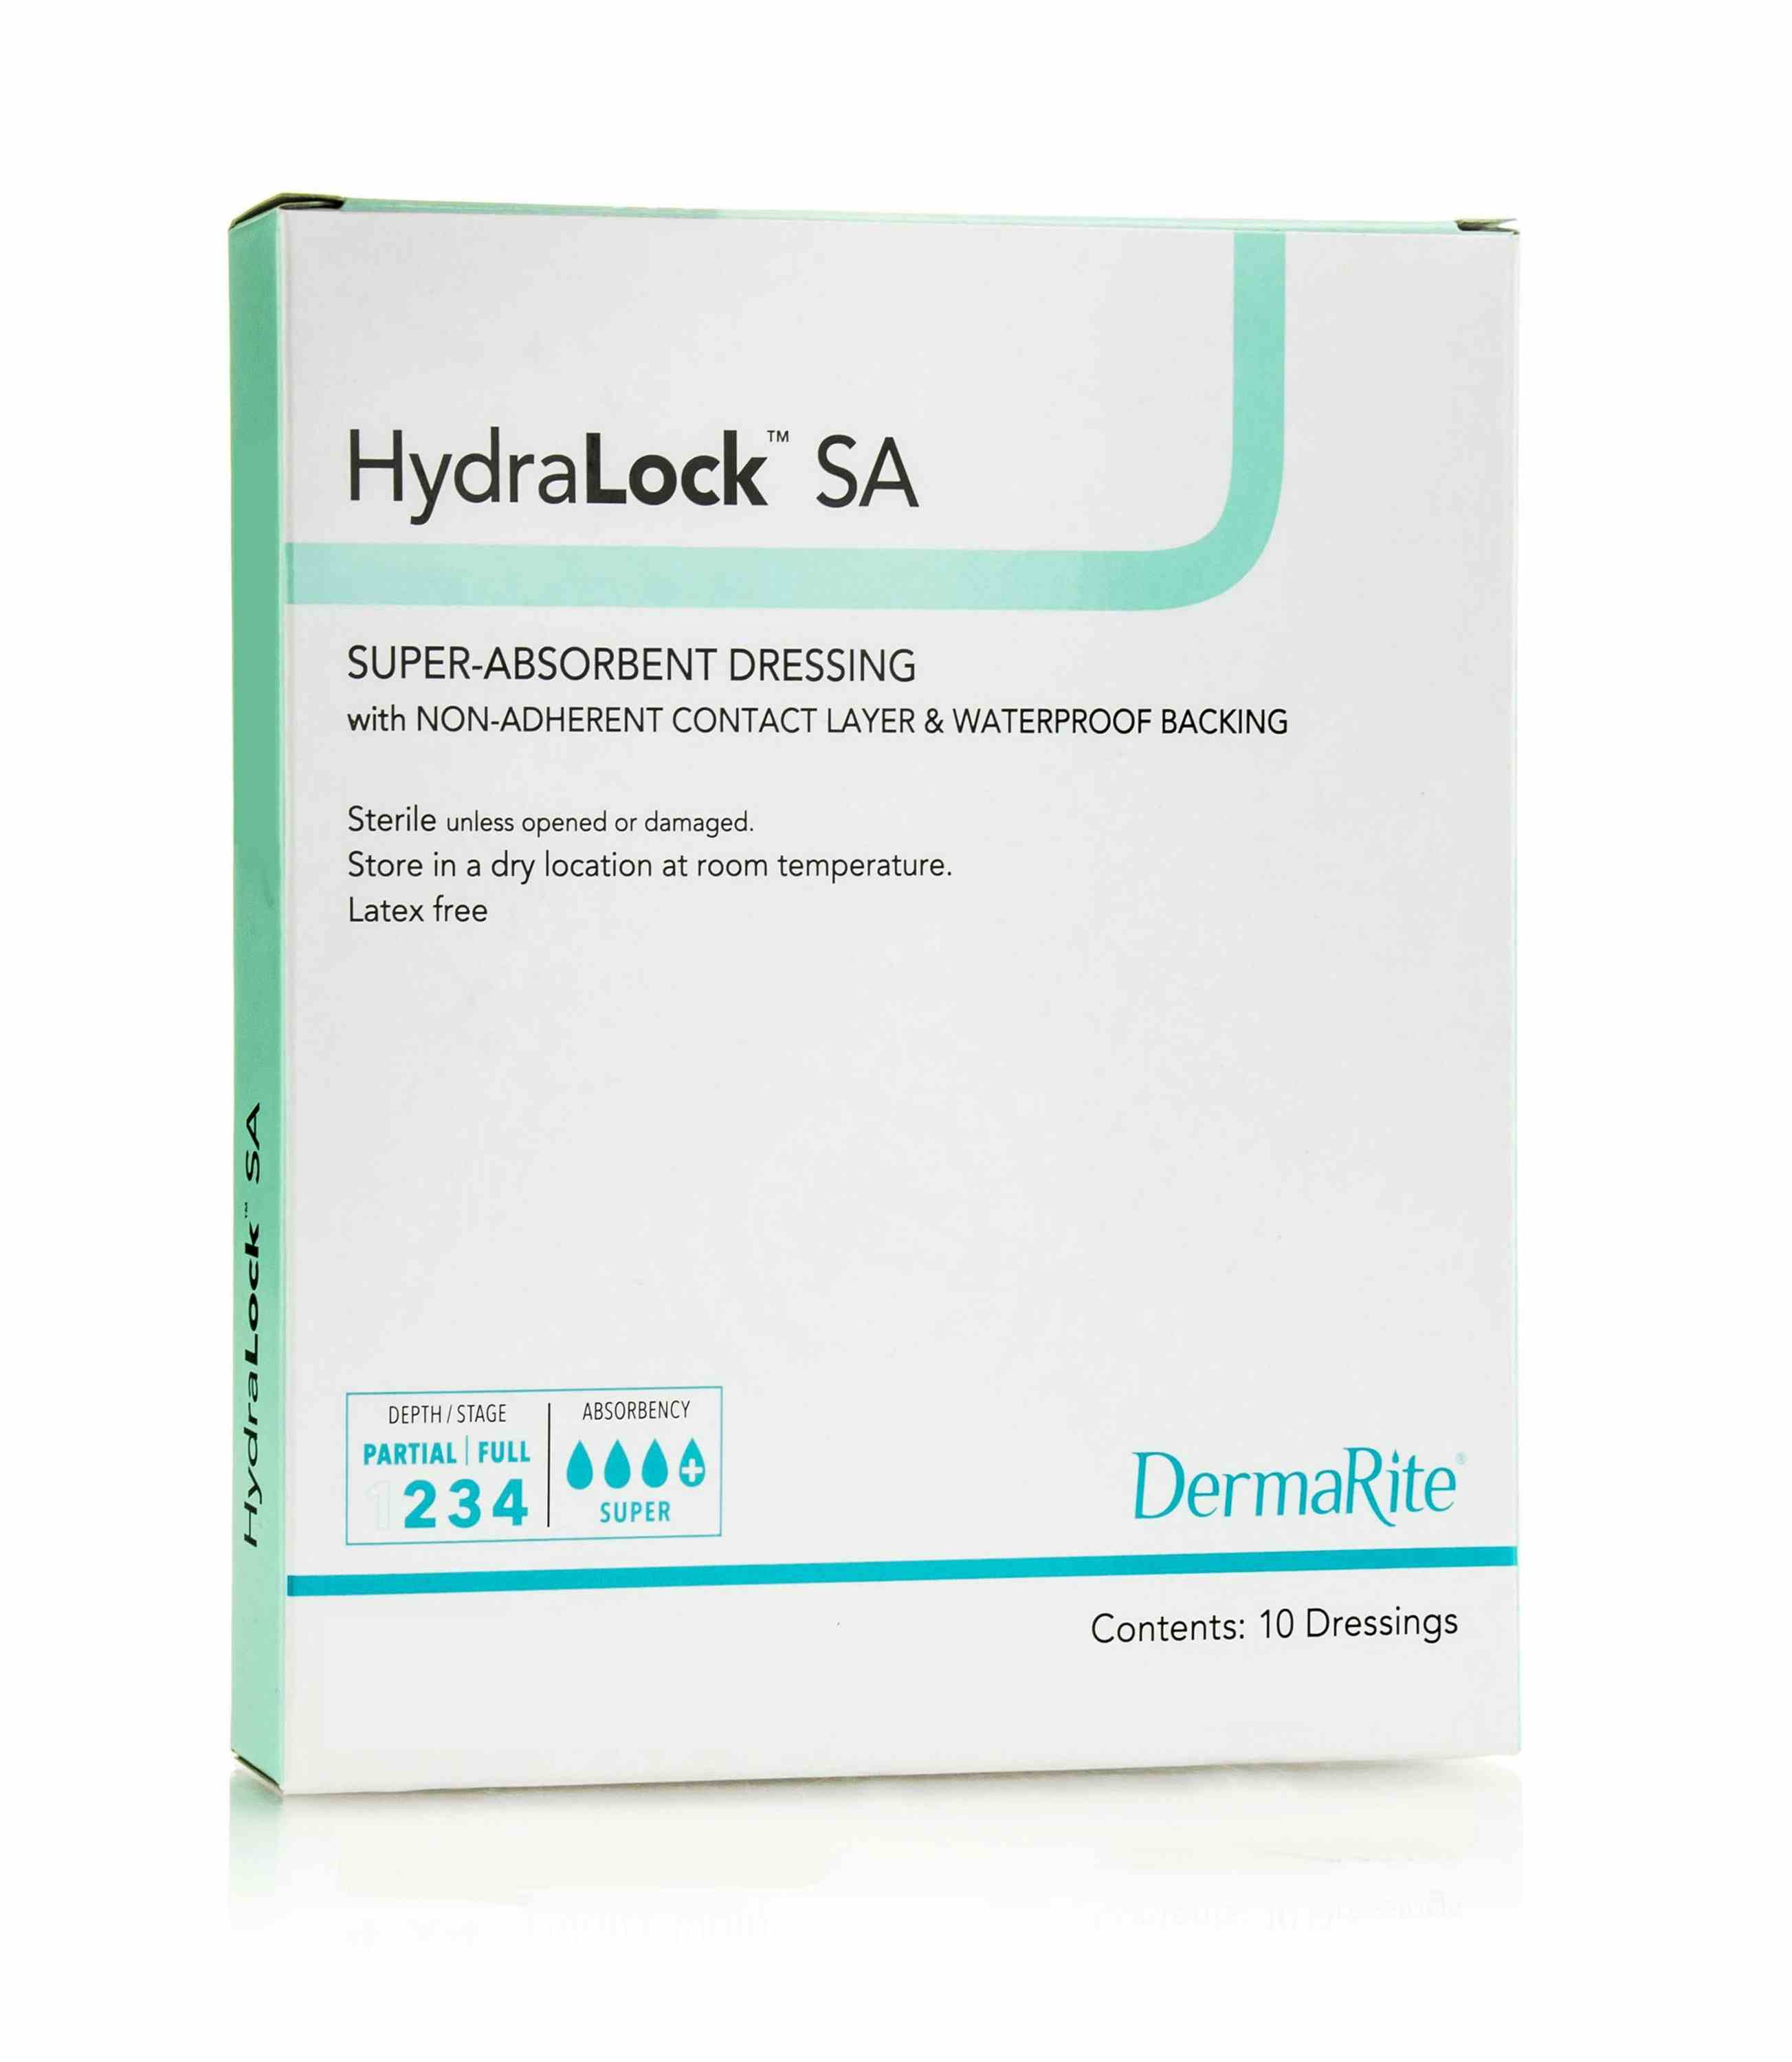 HydraLock SA Super-Absorbent Dressing with Non-Adherent Contact Layer & Waterproof Backing, 6 X 10", 60610, Box of 10